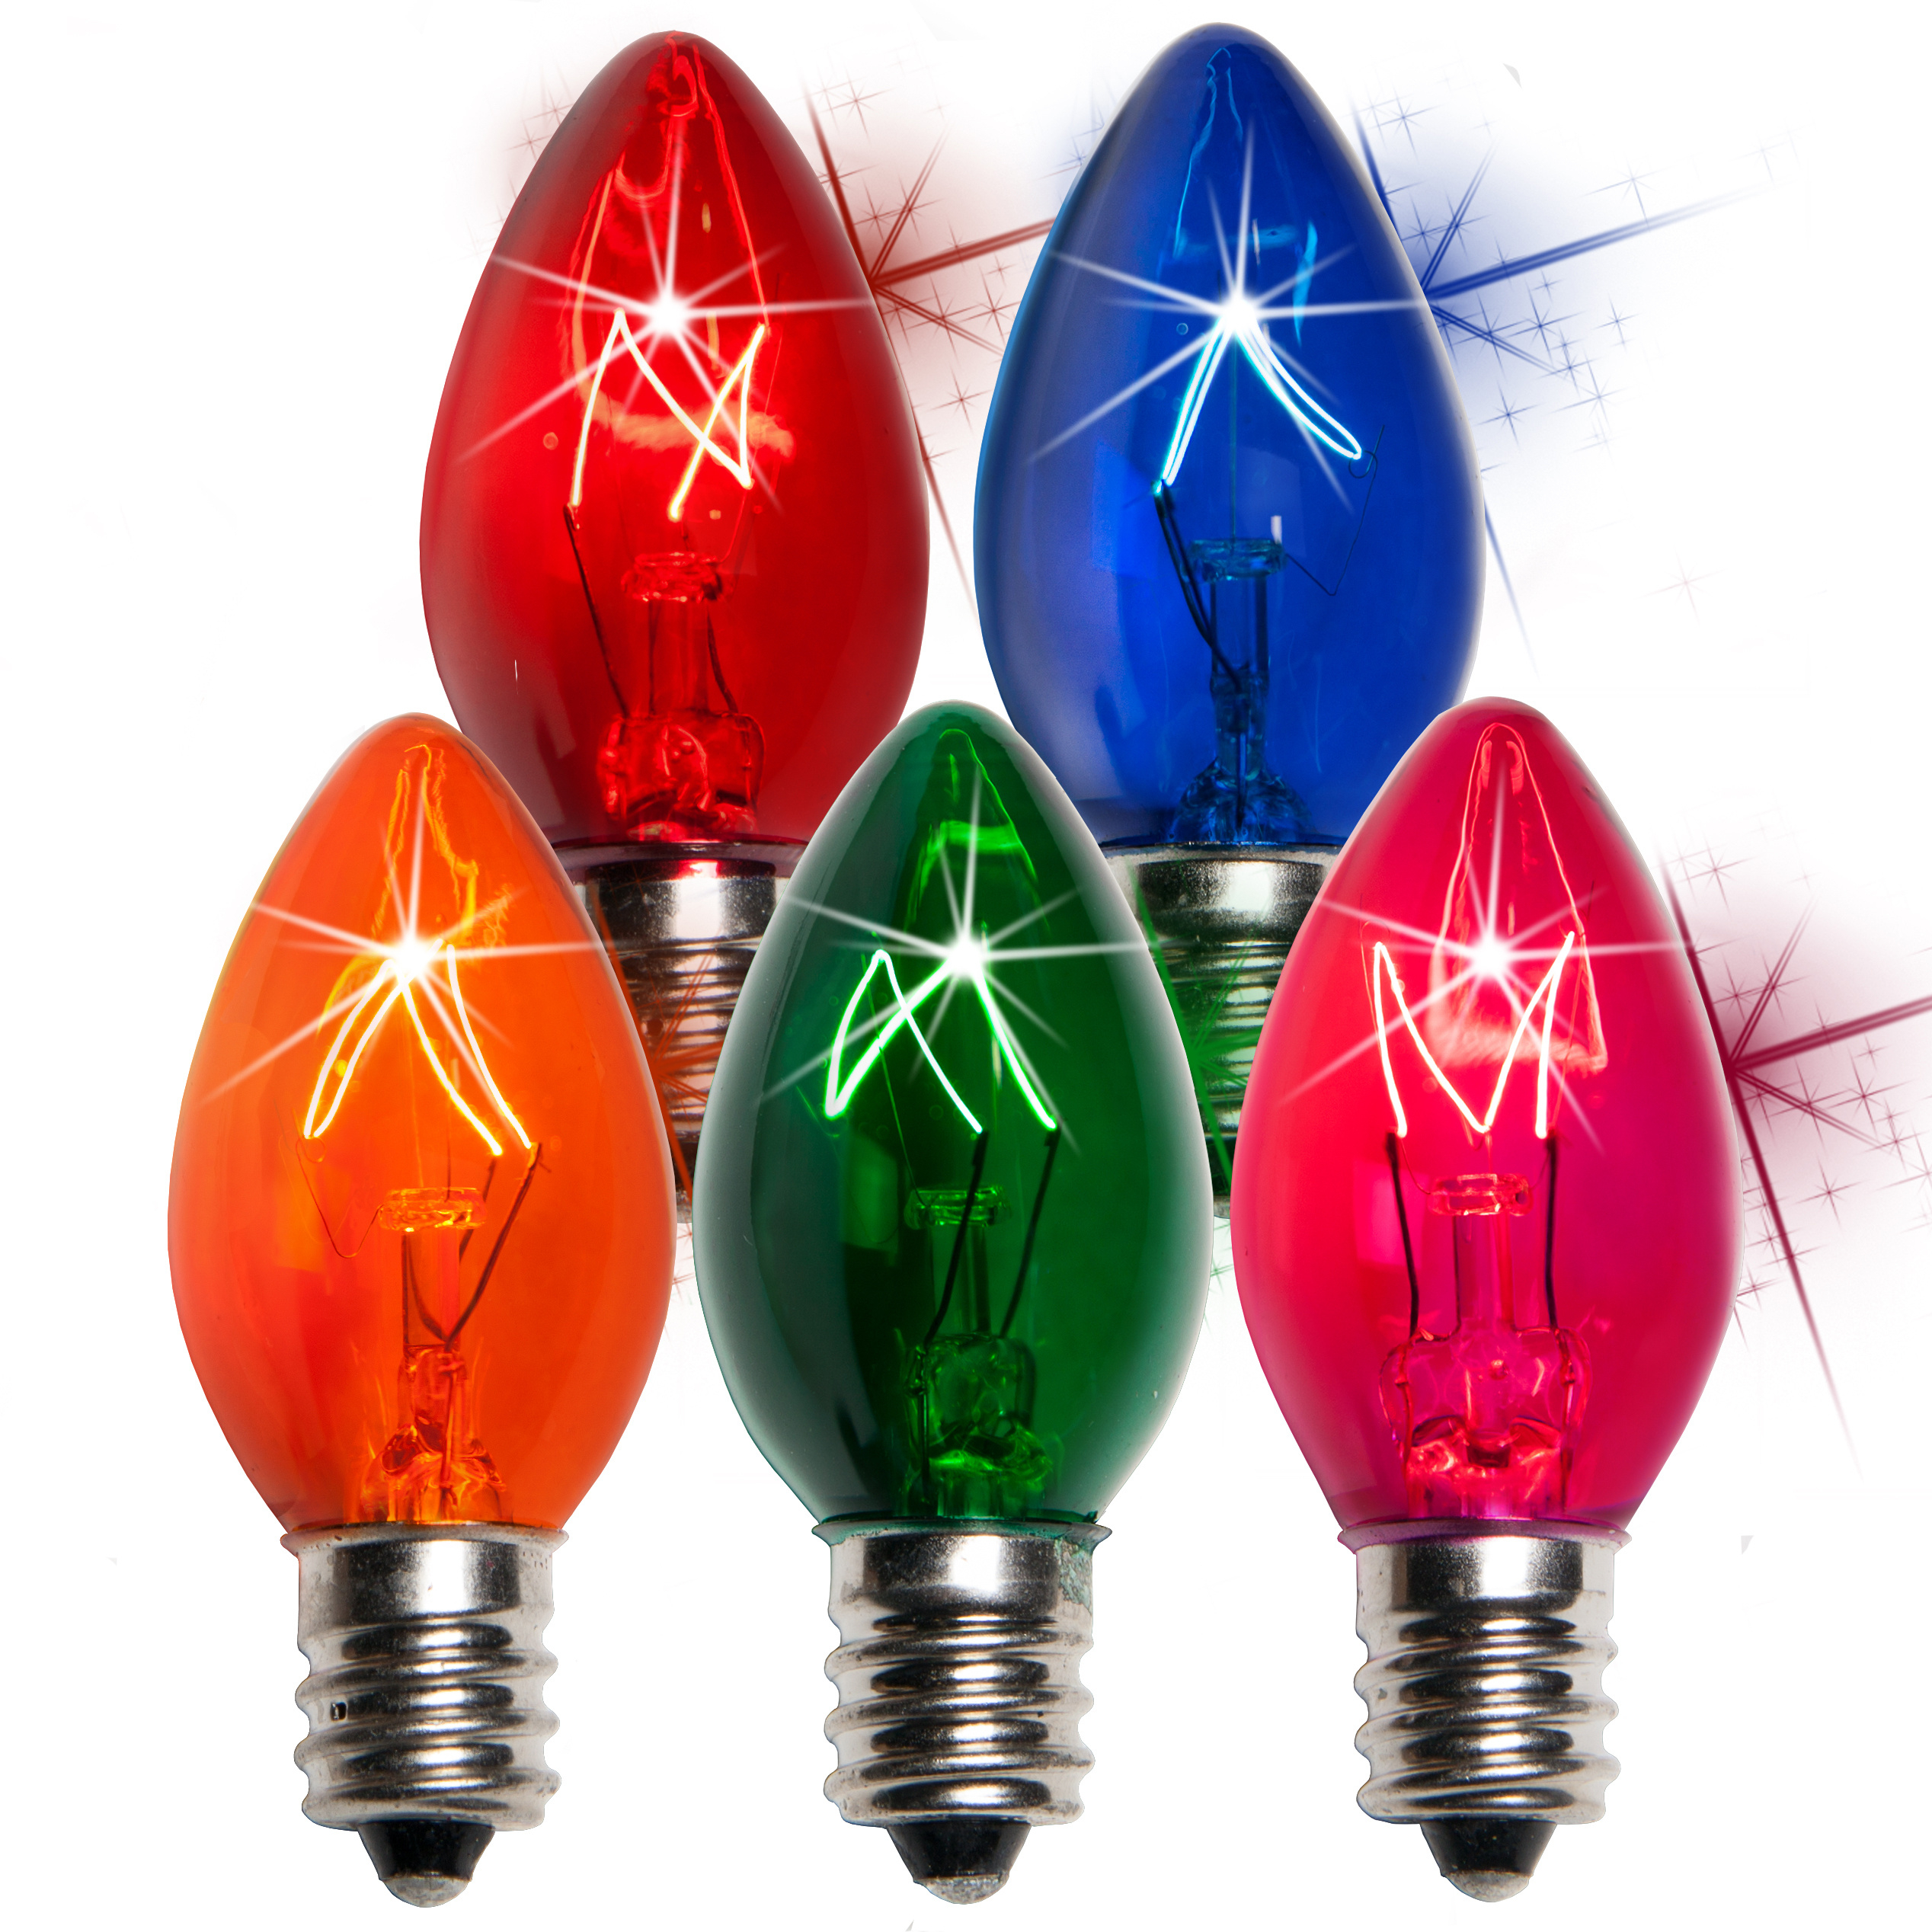 C7 Christmas Light Bulb C7 Twinkle Multicolor Christmas Light intended for size 2536 X 2536